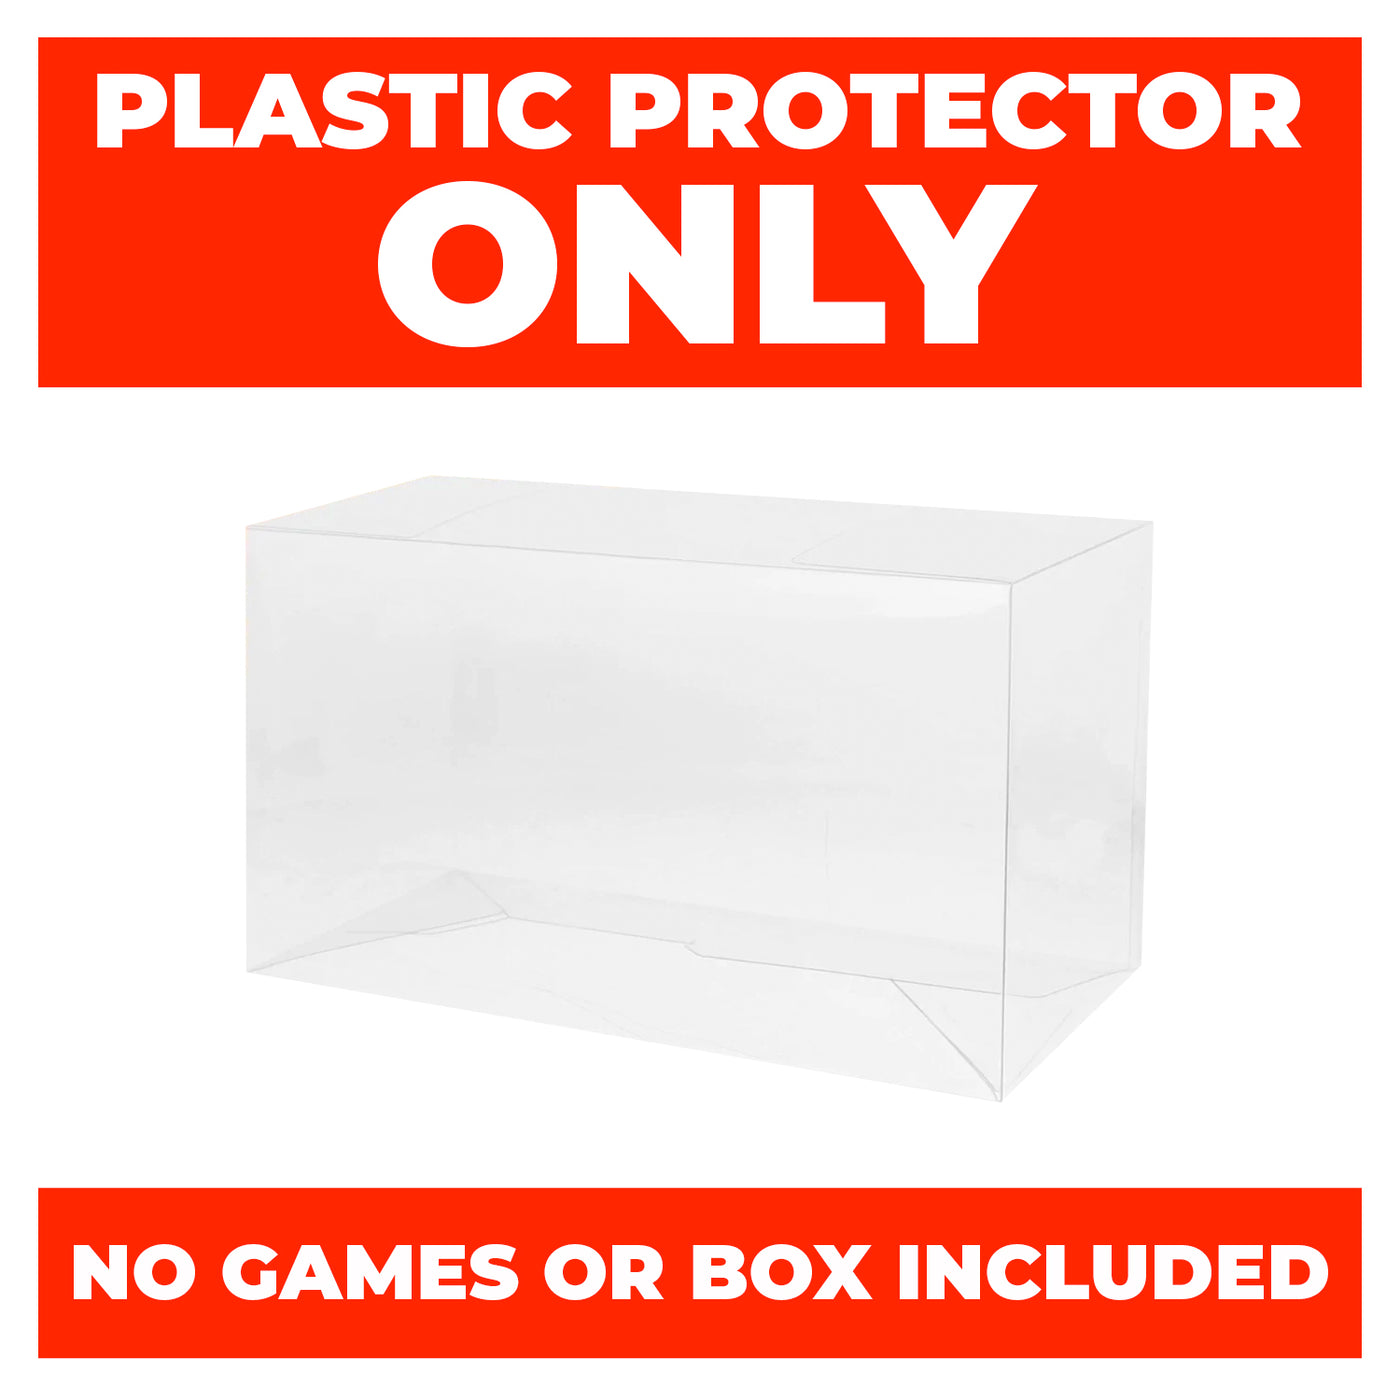 Plastic Protector for PLAYSTATION Video Game Console Box 0.50mm thick, UV & Scratch Resistant 8.75h x 8.75w x 3.5d on The Pop Protector Guide by Display Geek